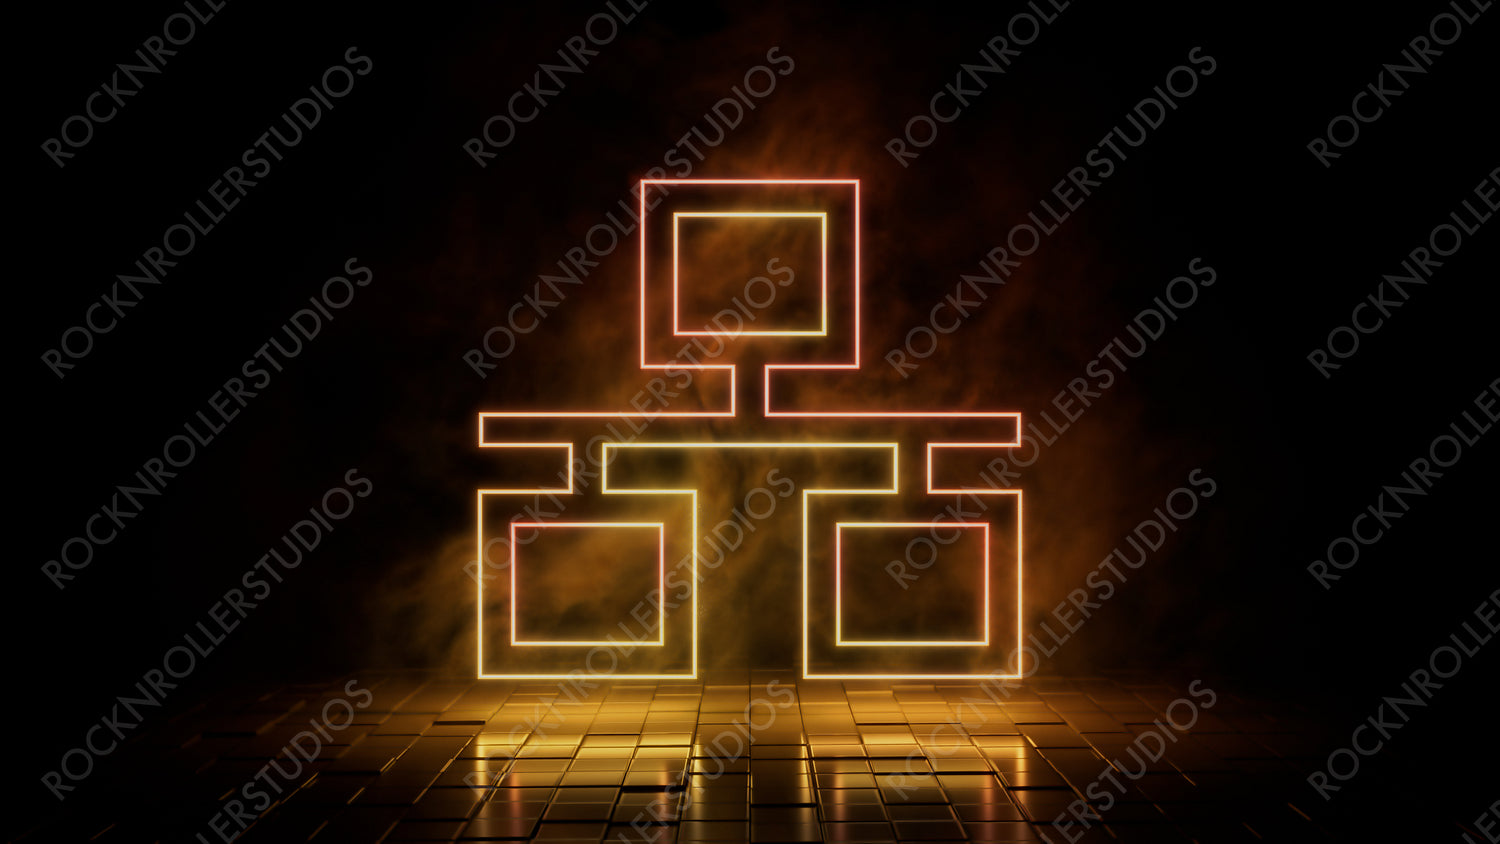 Orange and yellow neon light ethernet icon. Vibrant colored technology symbol, isolated on a black background. 3D Render